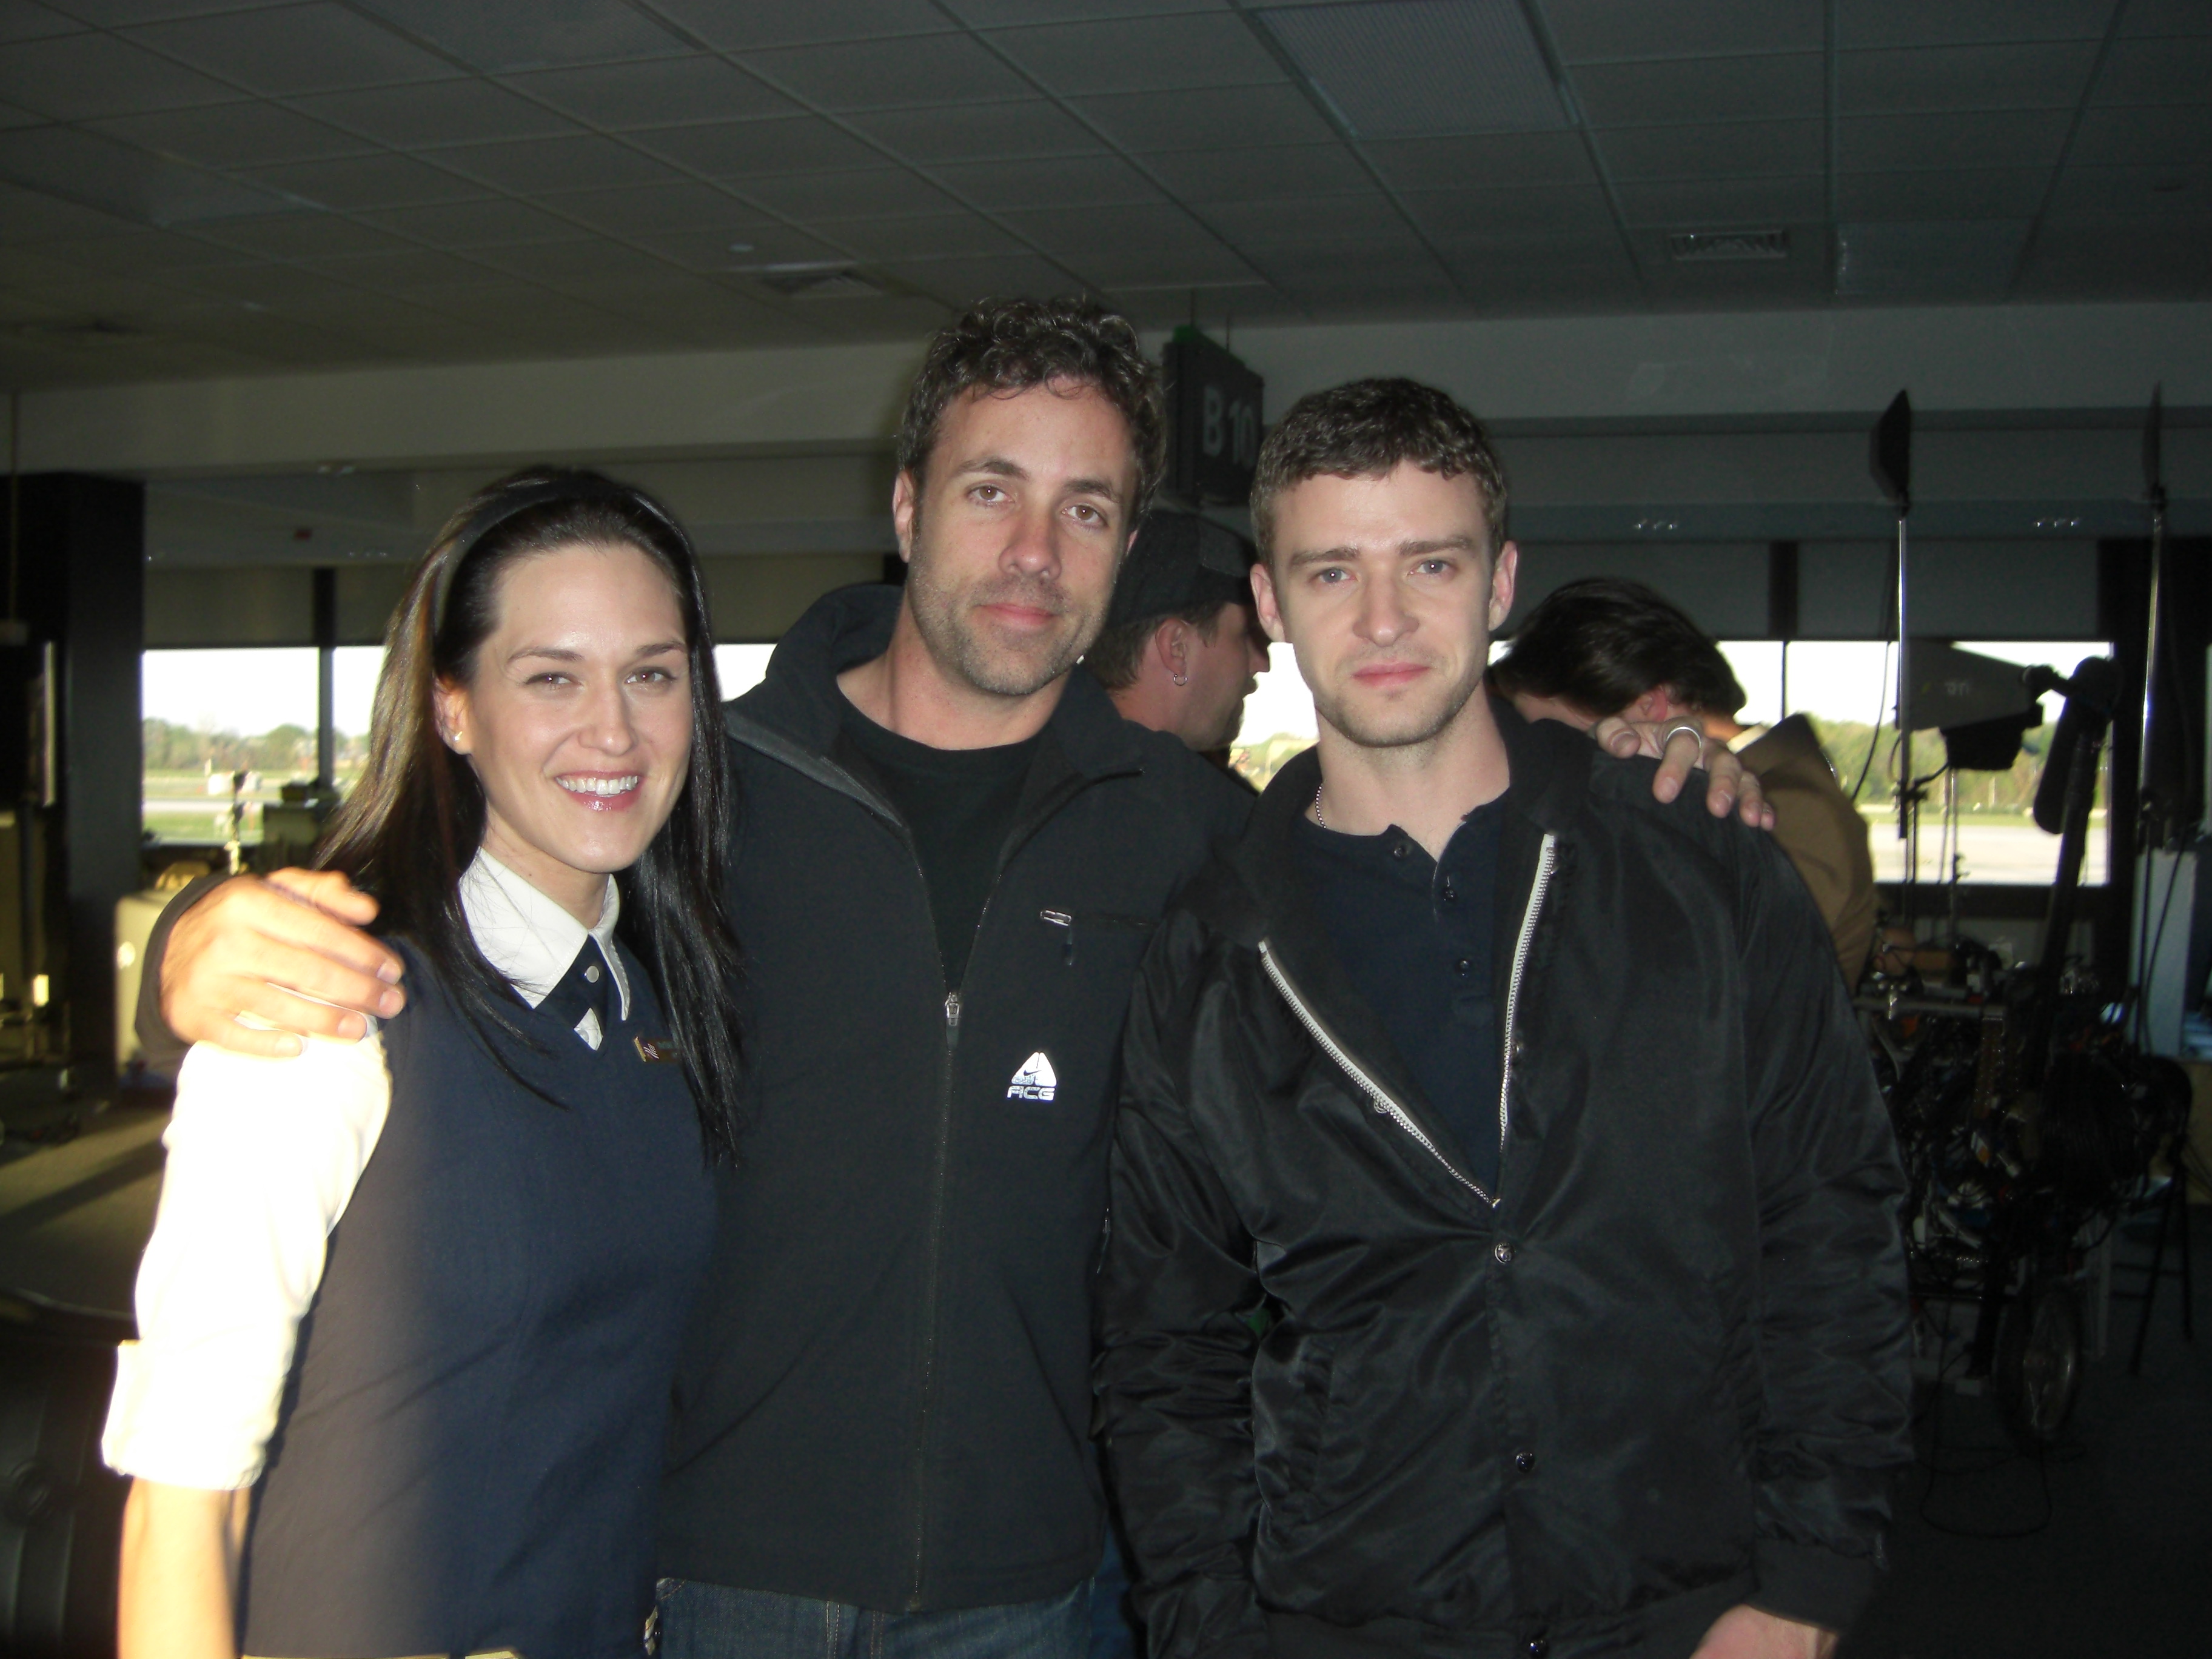 Karson Kendall, Michael Meredith, and Justin Timberlake on the set of The Open Road (2008).